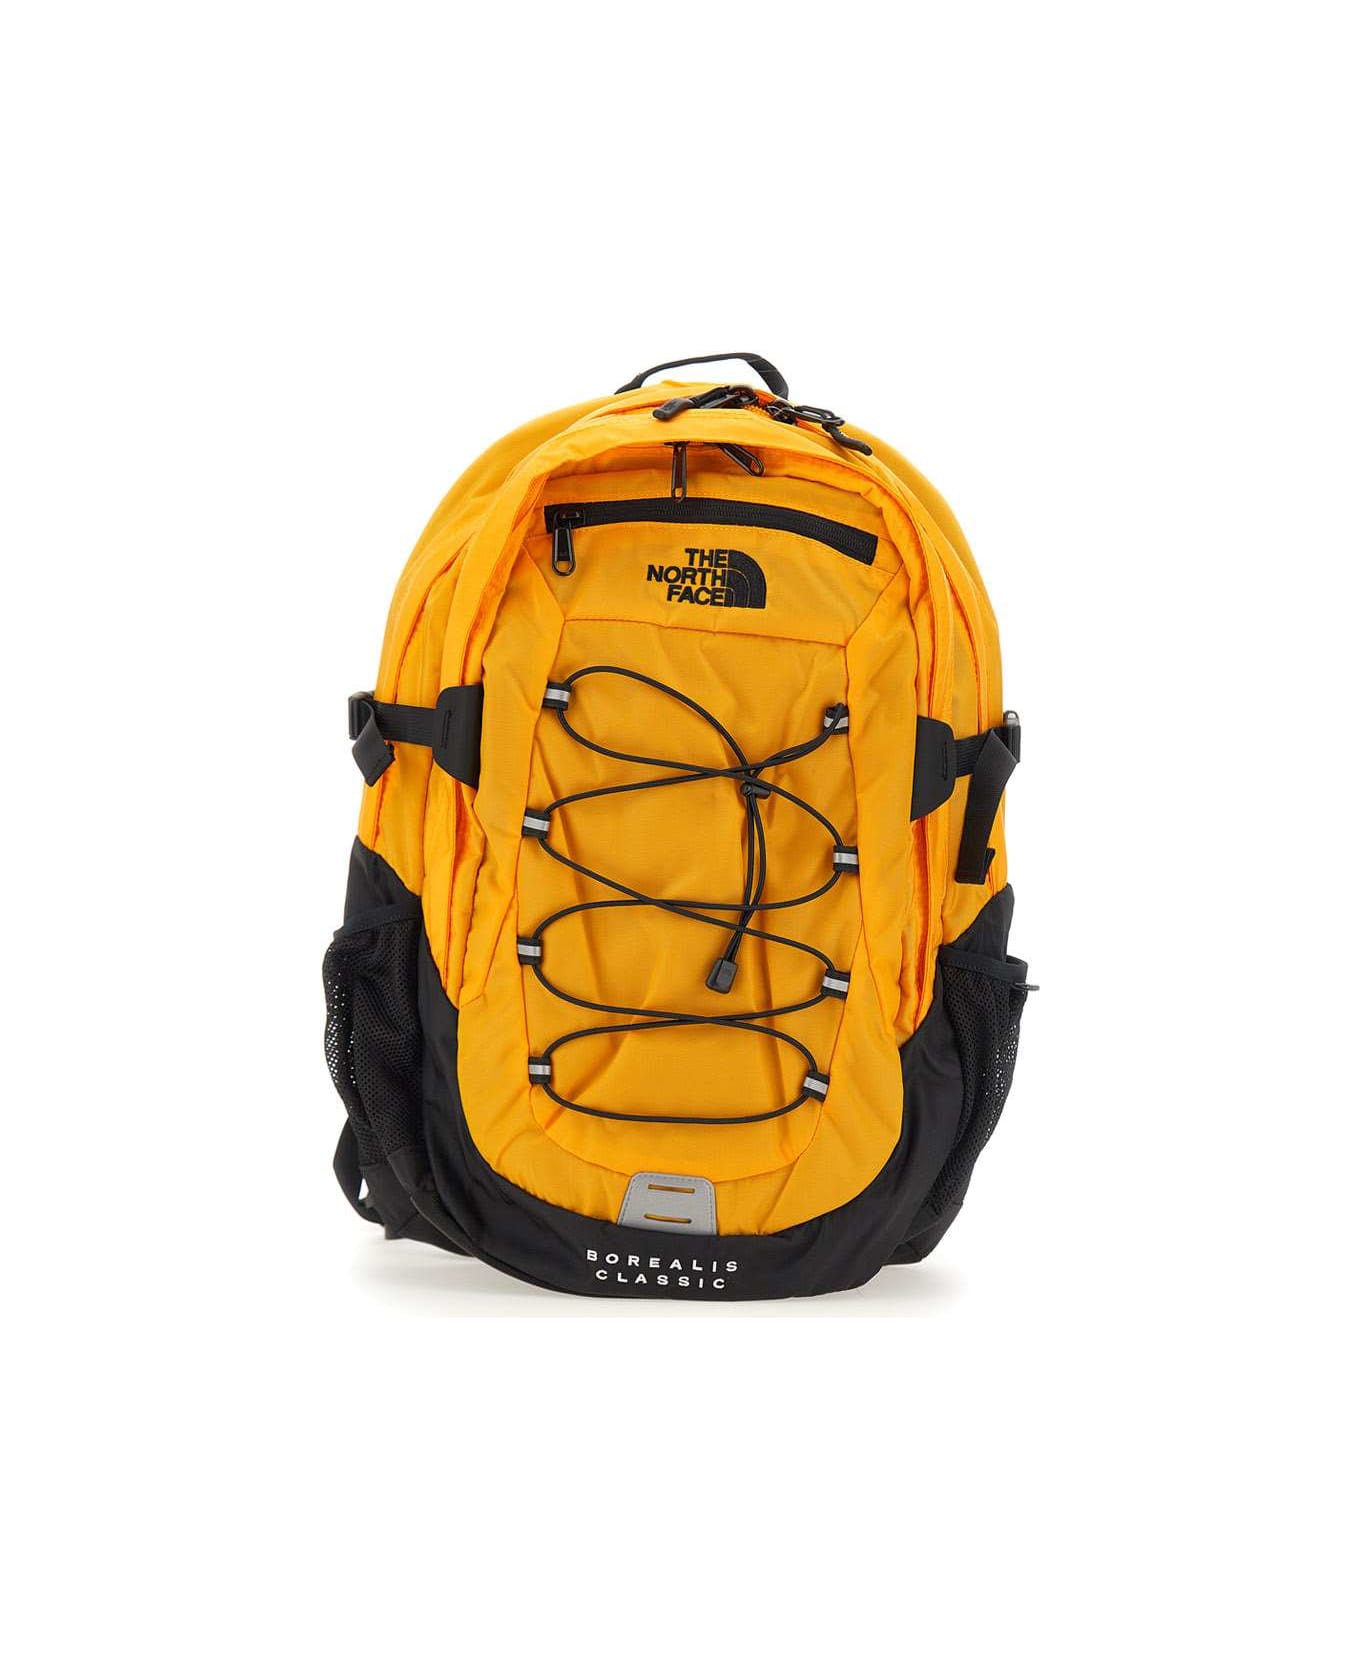 The North Face "borealis Classic" Backpack - YELLOW